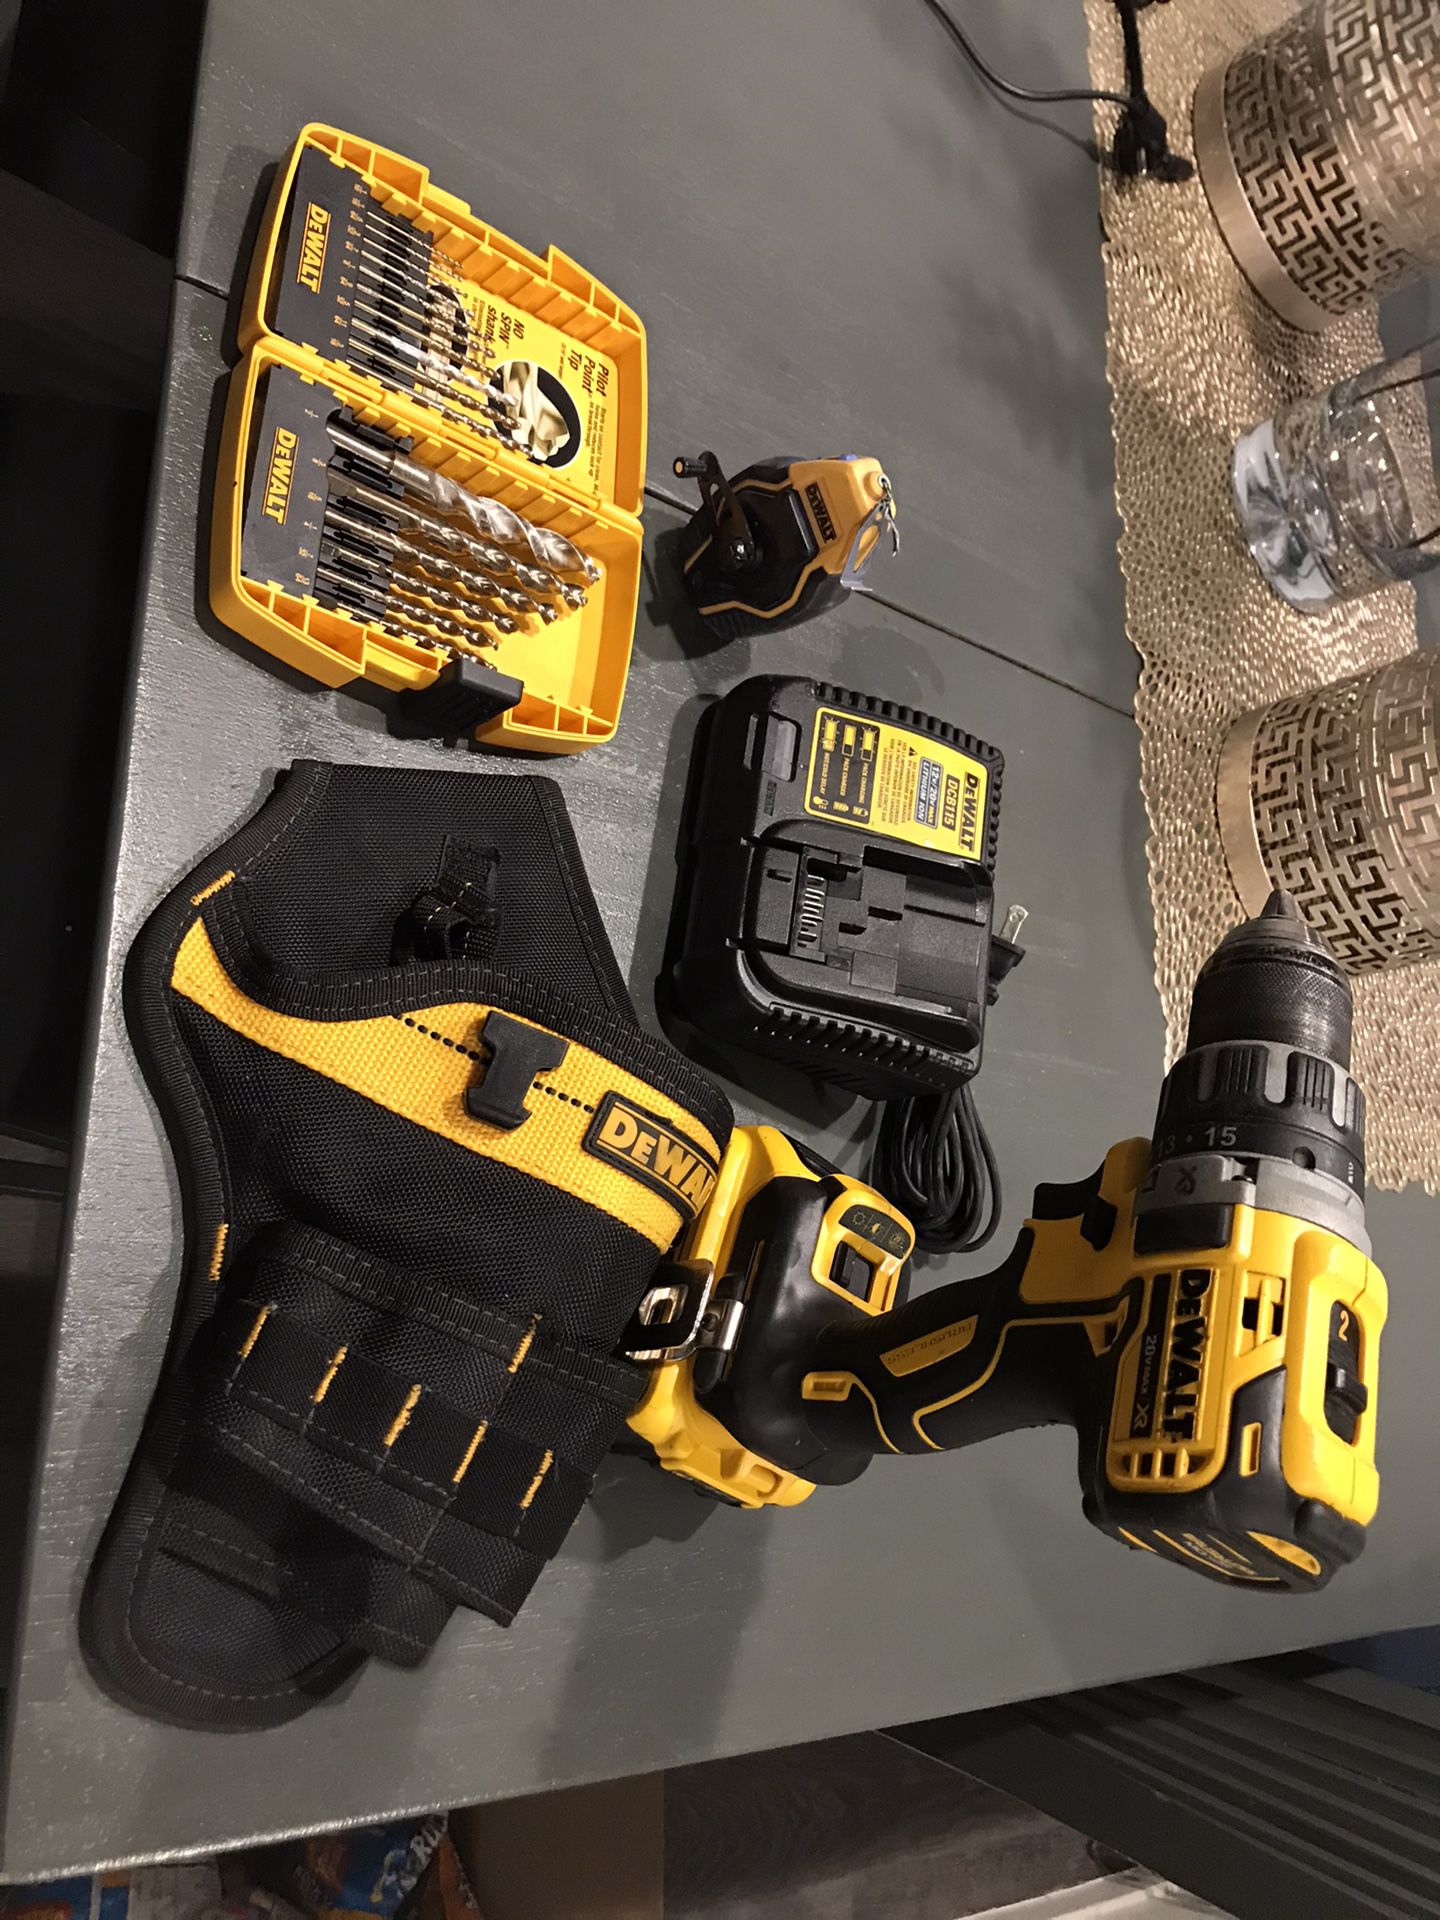 Dewalt brushless drill with 4ah battery & a few other things